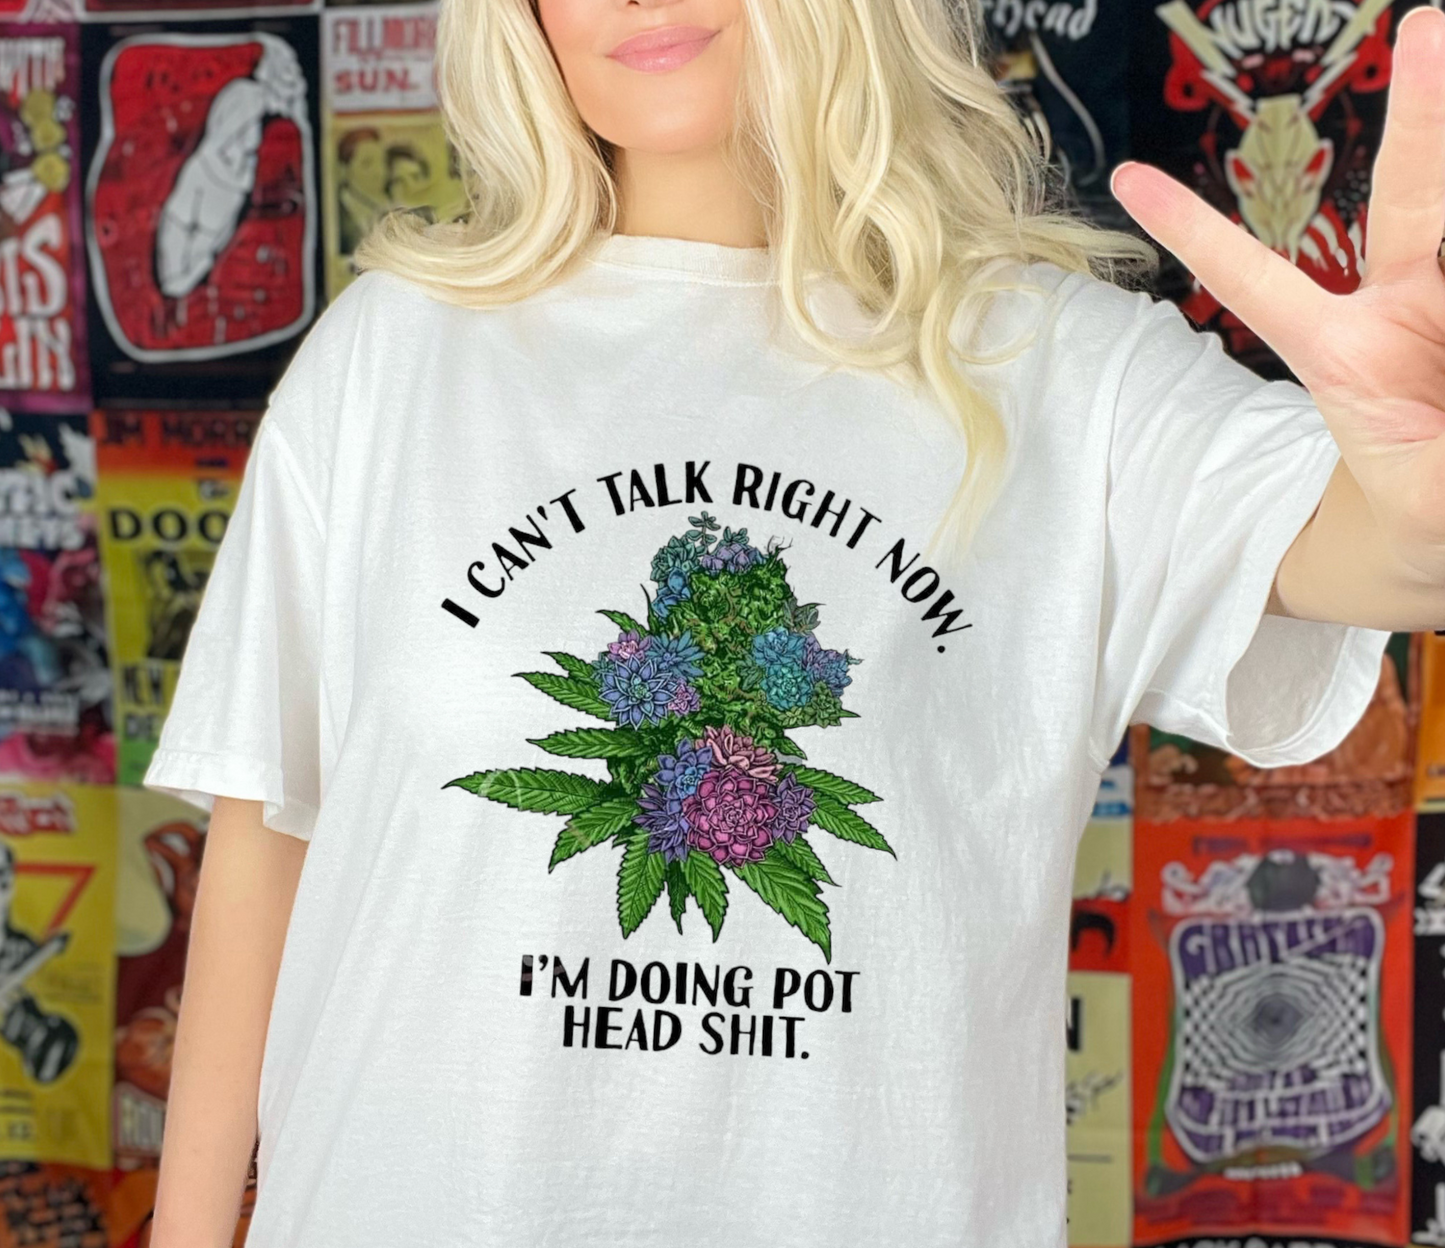 I can’t talk right now, I’m doing pot head shit Adult Cotton T-shirt